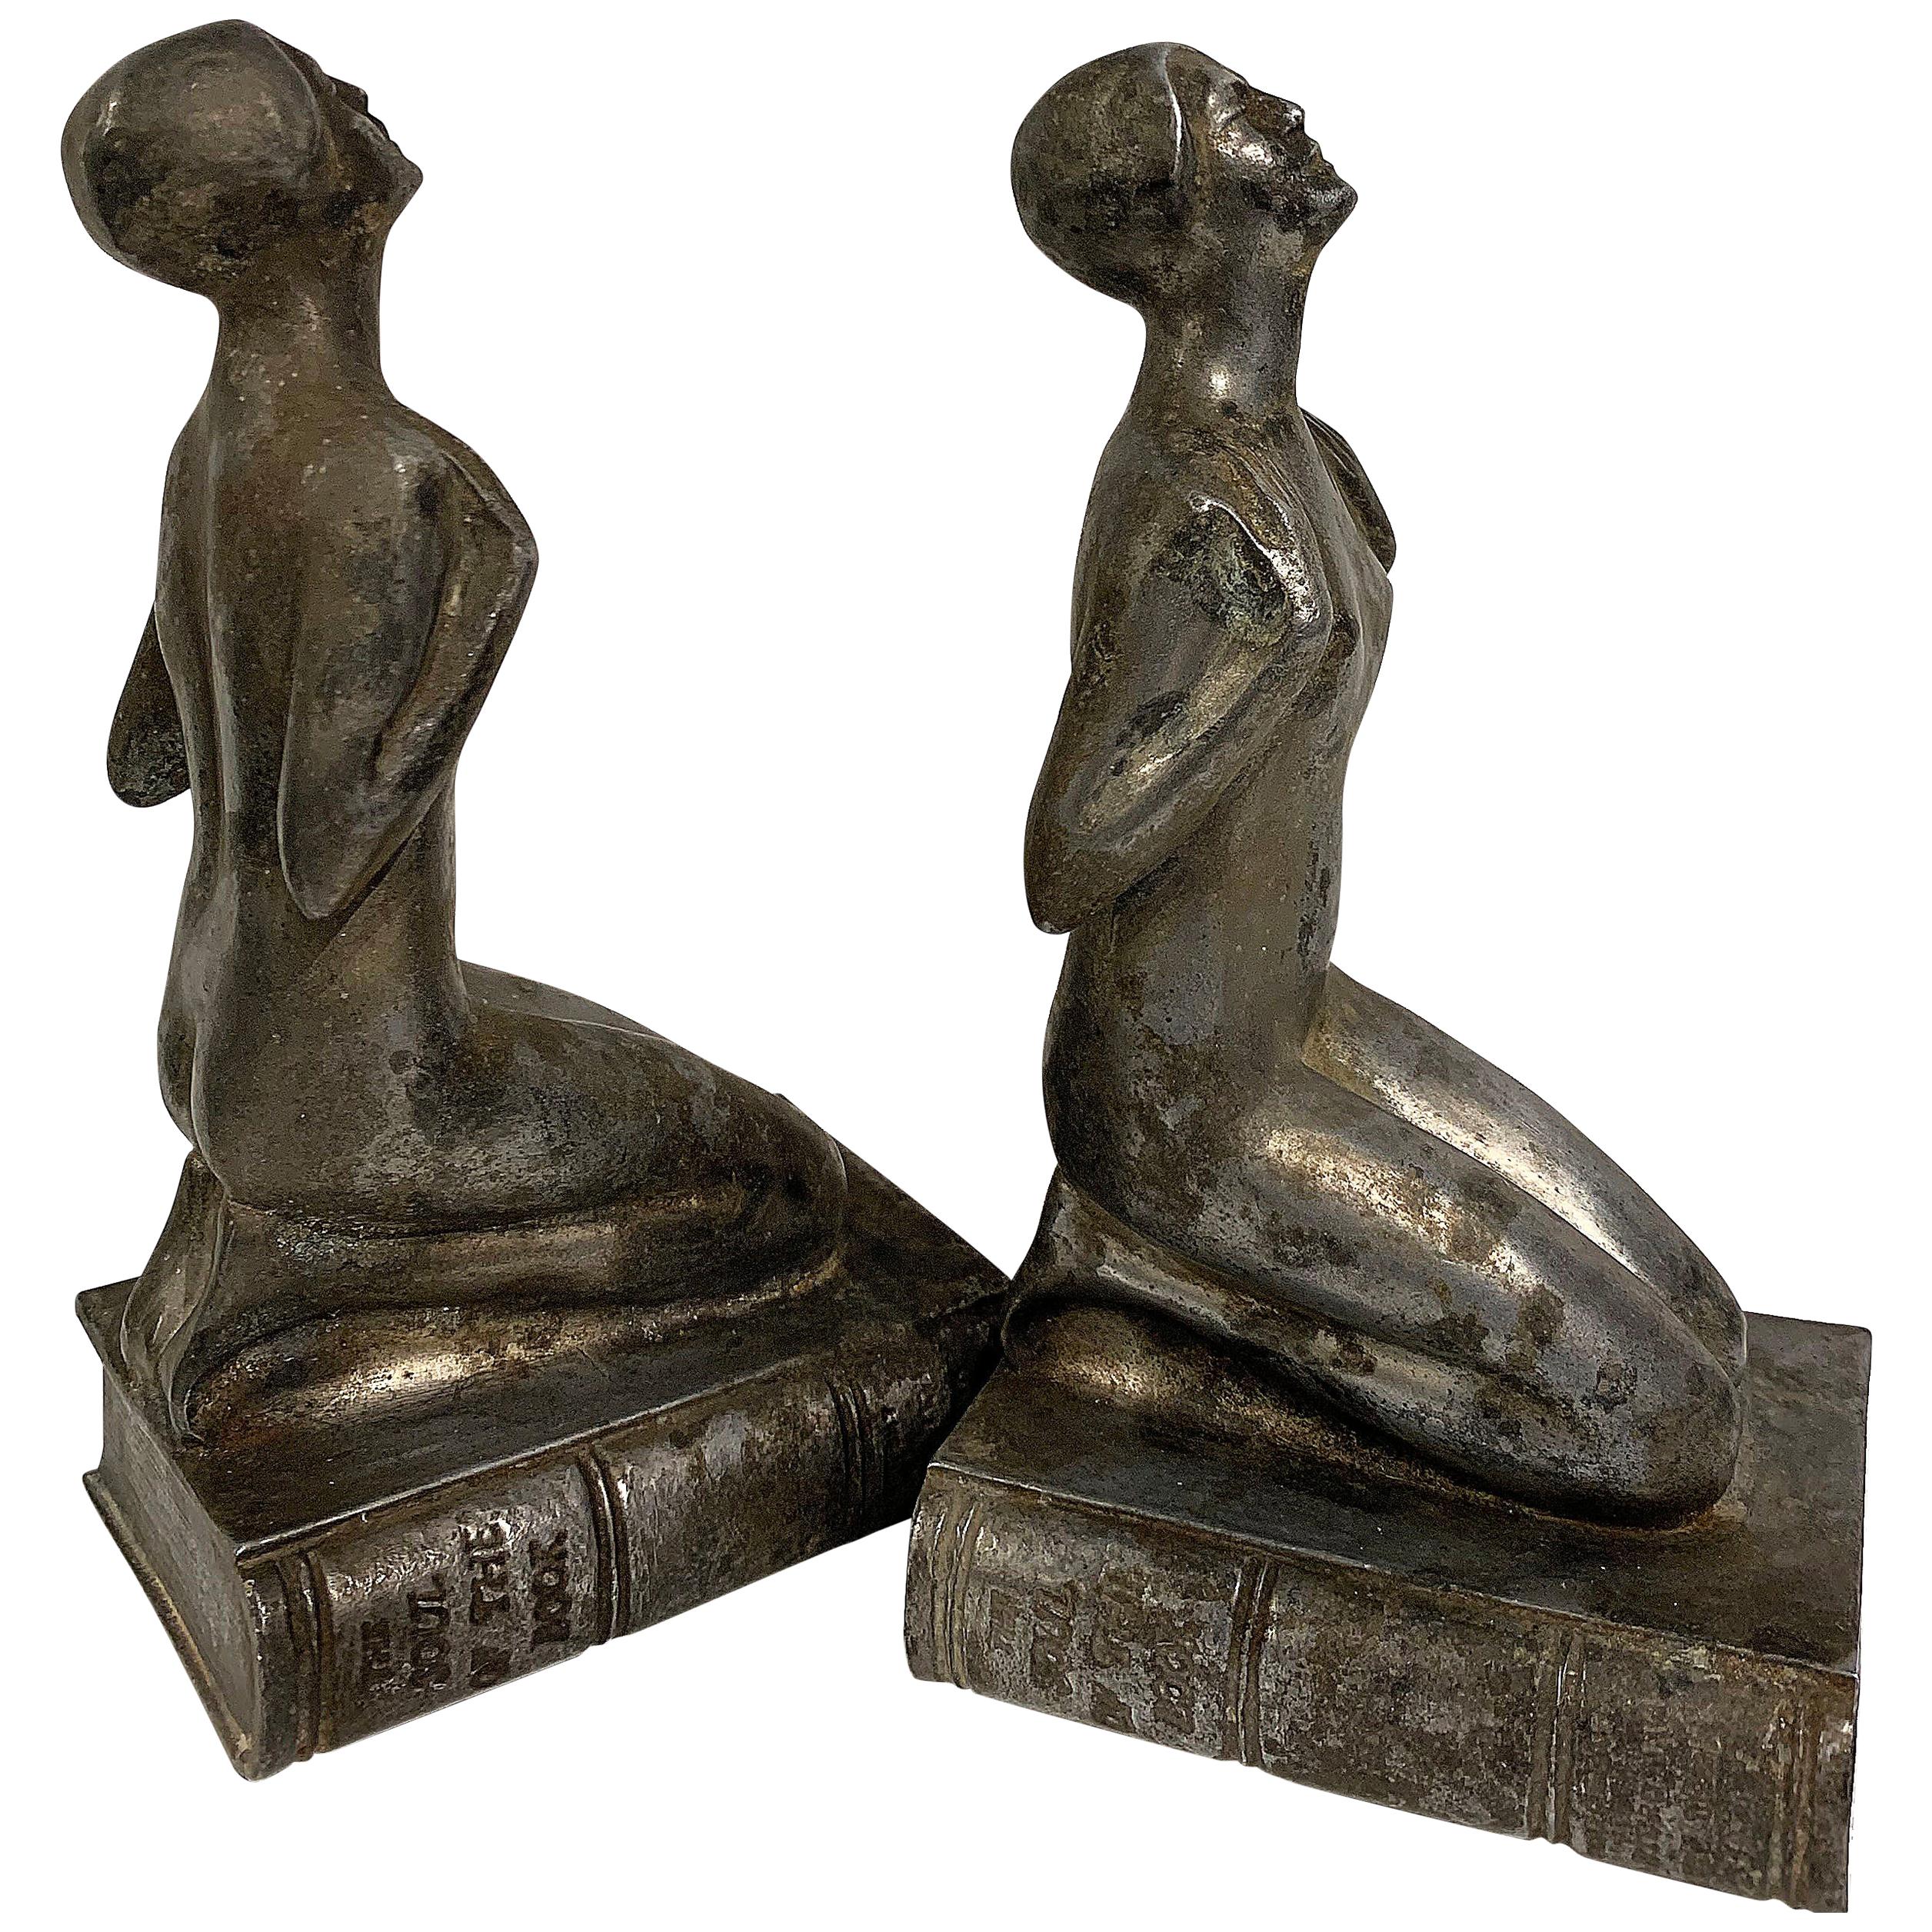 1925 Chrome Female Bookends, "The Soul of The Book" by Arturo Levi For Sale